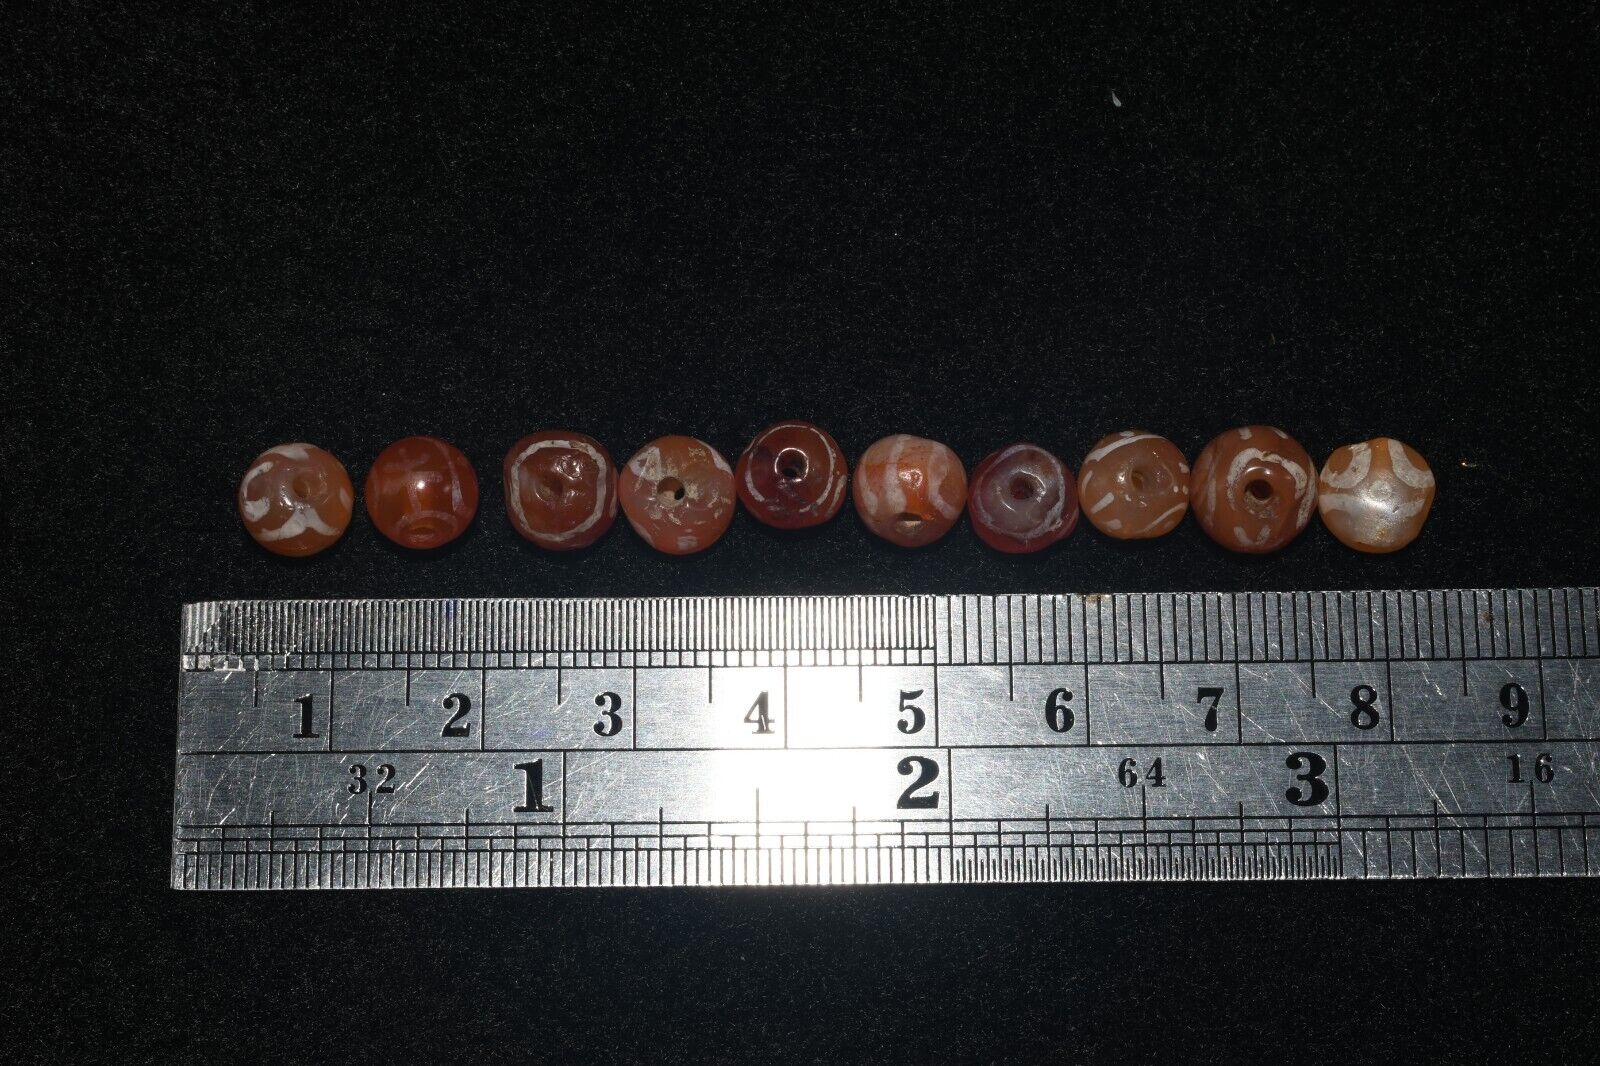 Authentic 10 Ancient Indus Valley Etched Round Carnelian Beads Ca. 2600-1700 BCE Без бренда - фотография #10